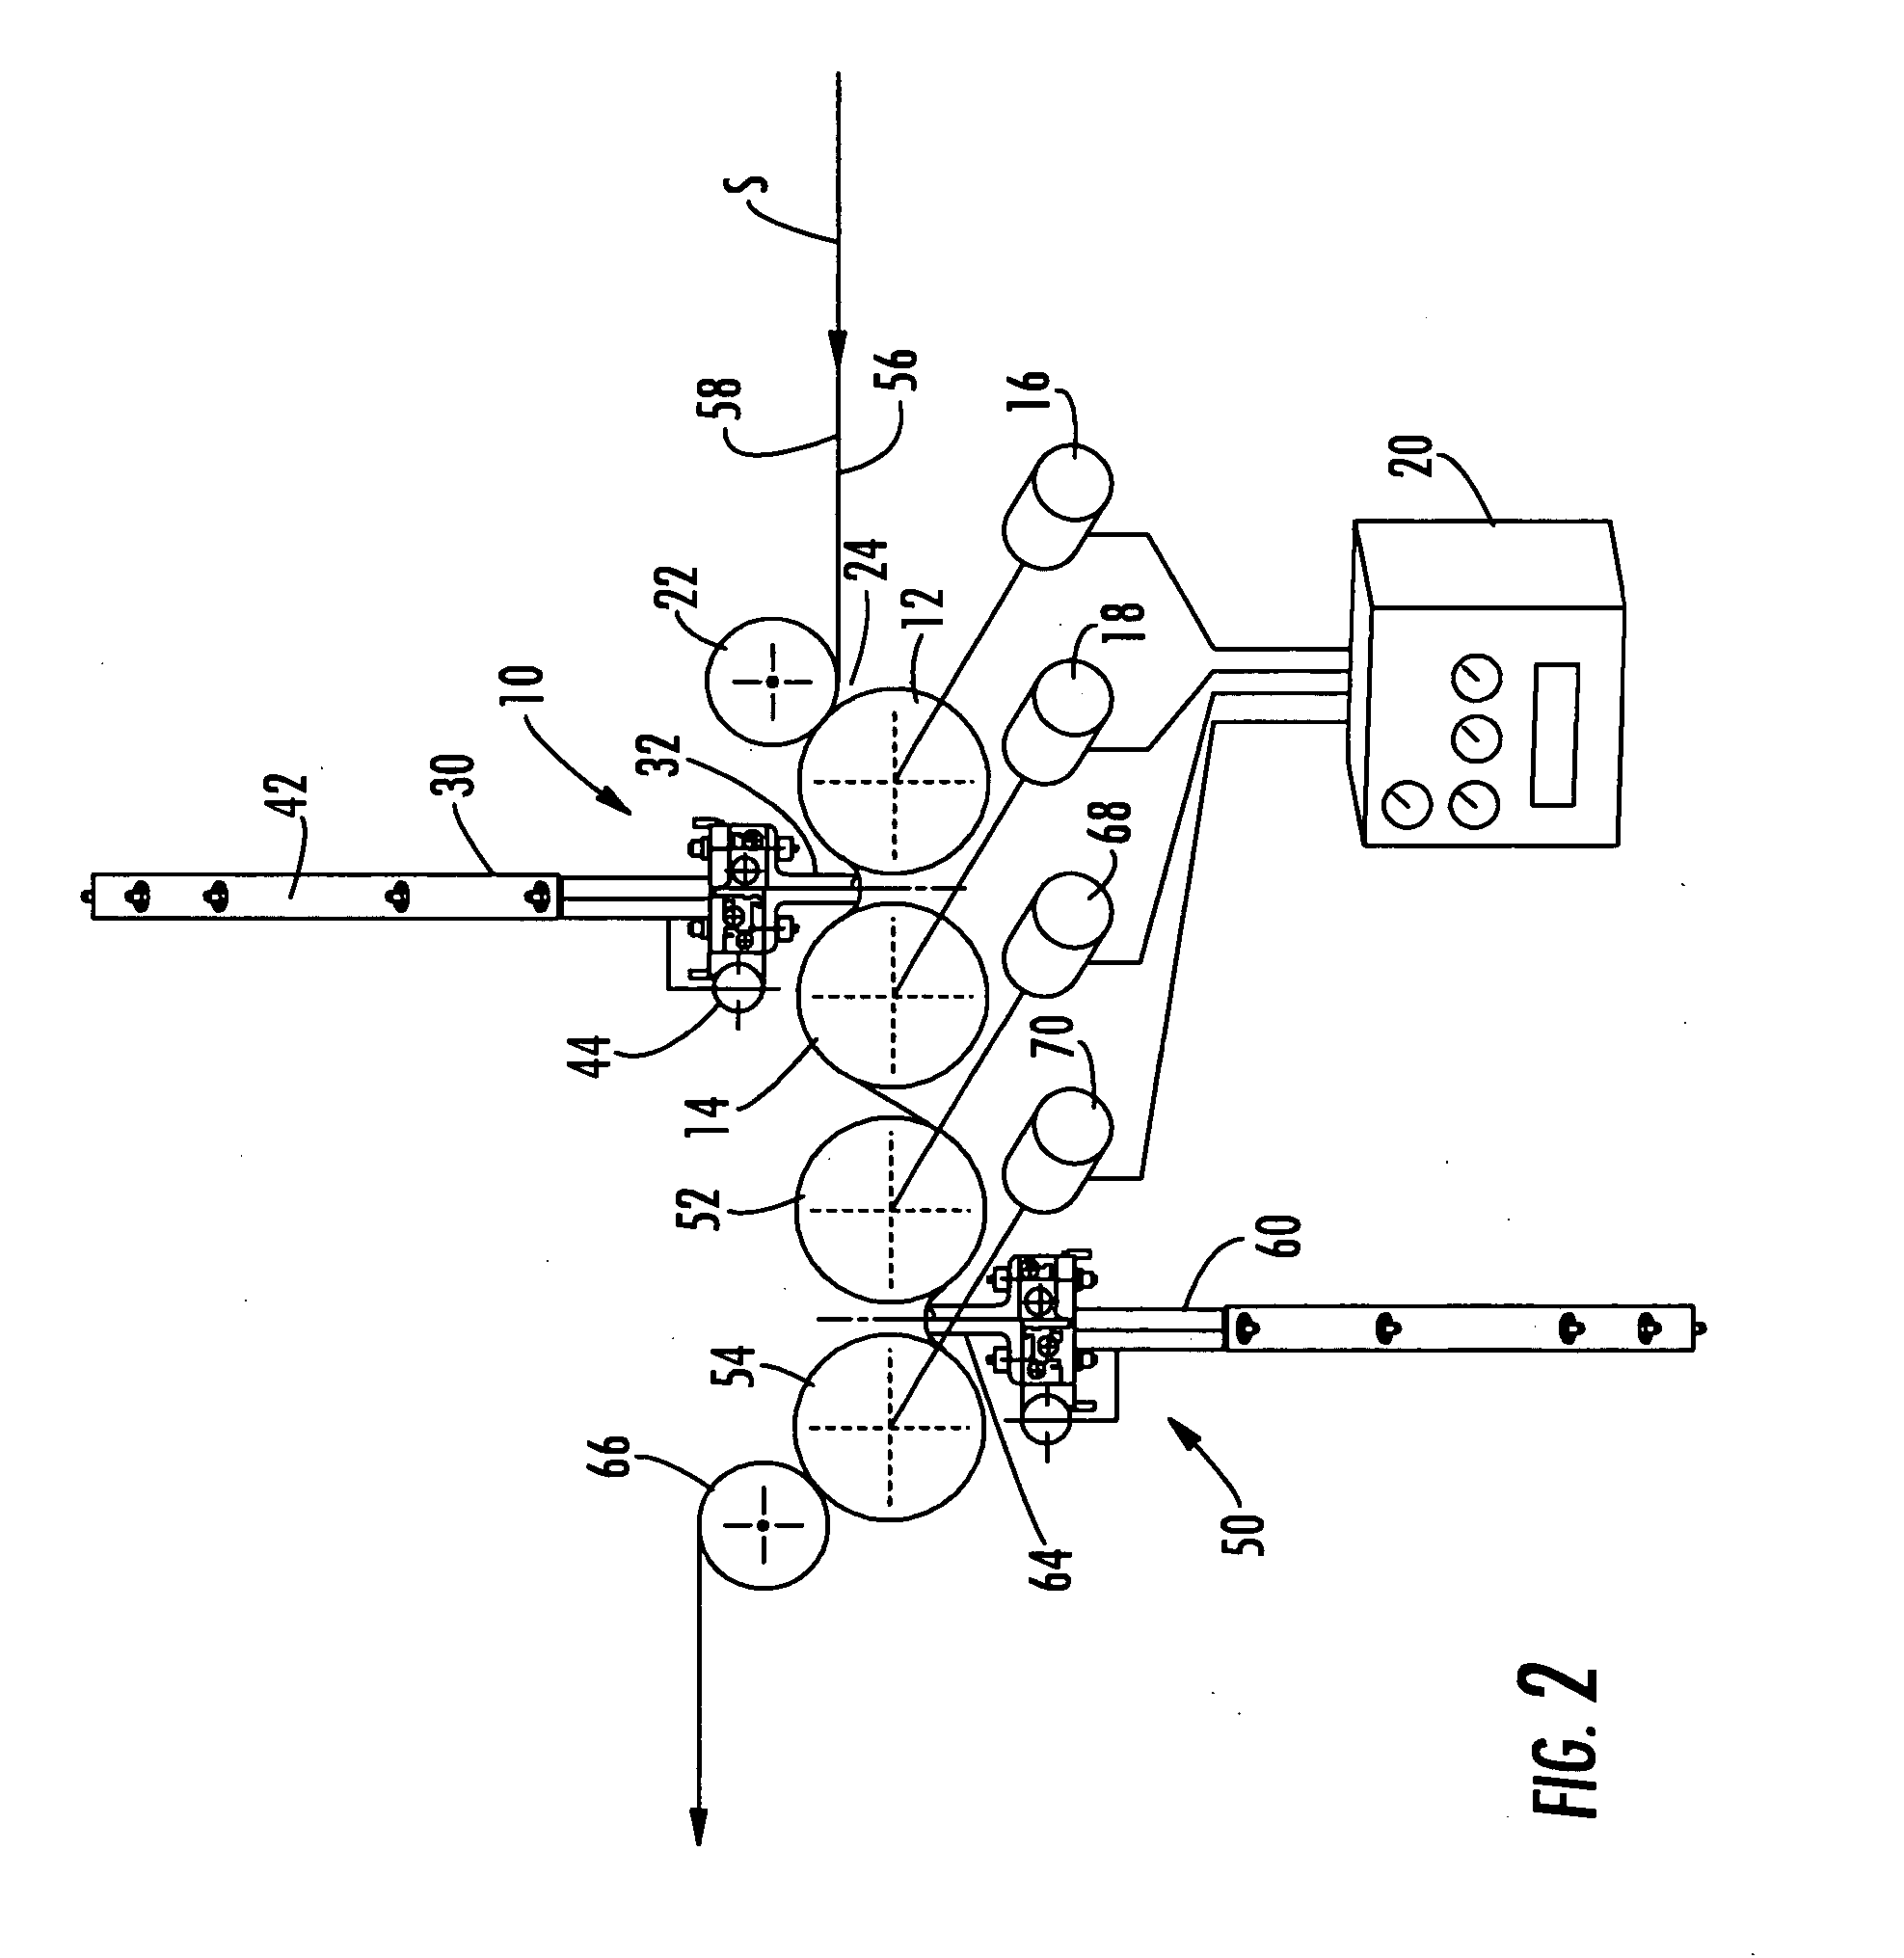 Apparatus and method for applying a foamed composition to a dimensionally unstable traveling substrate